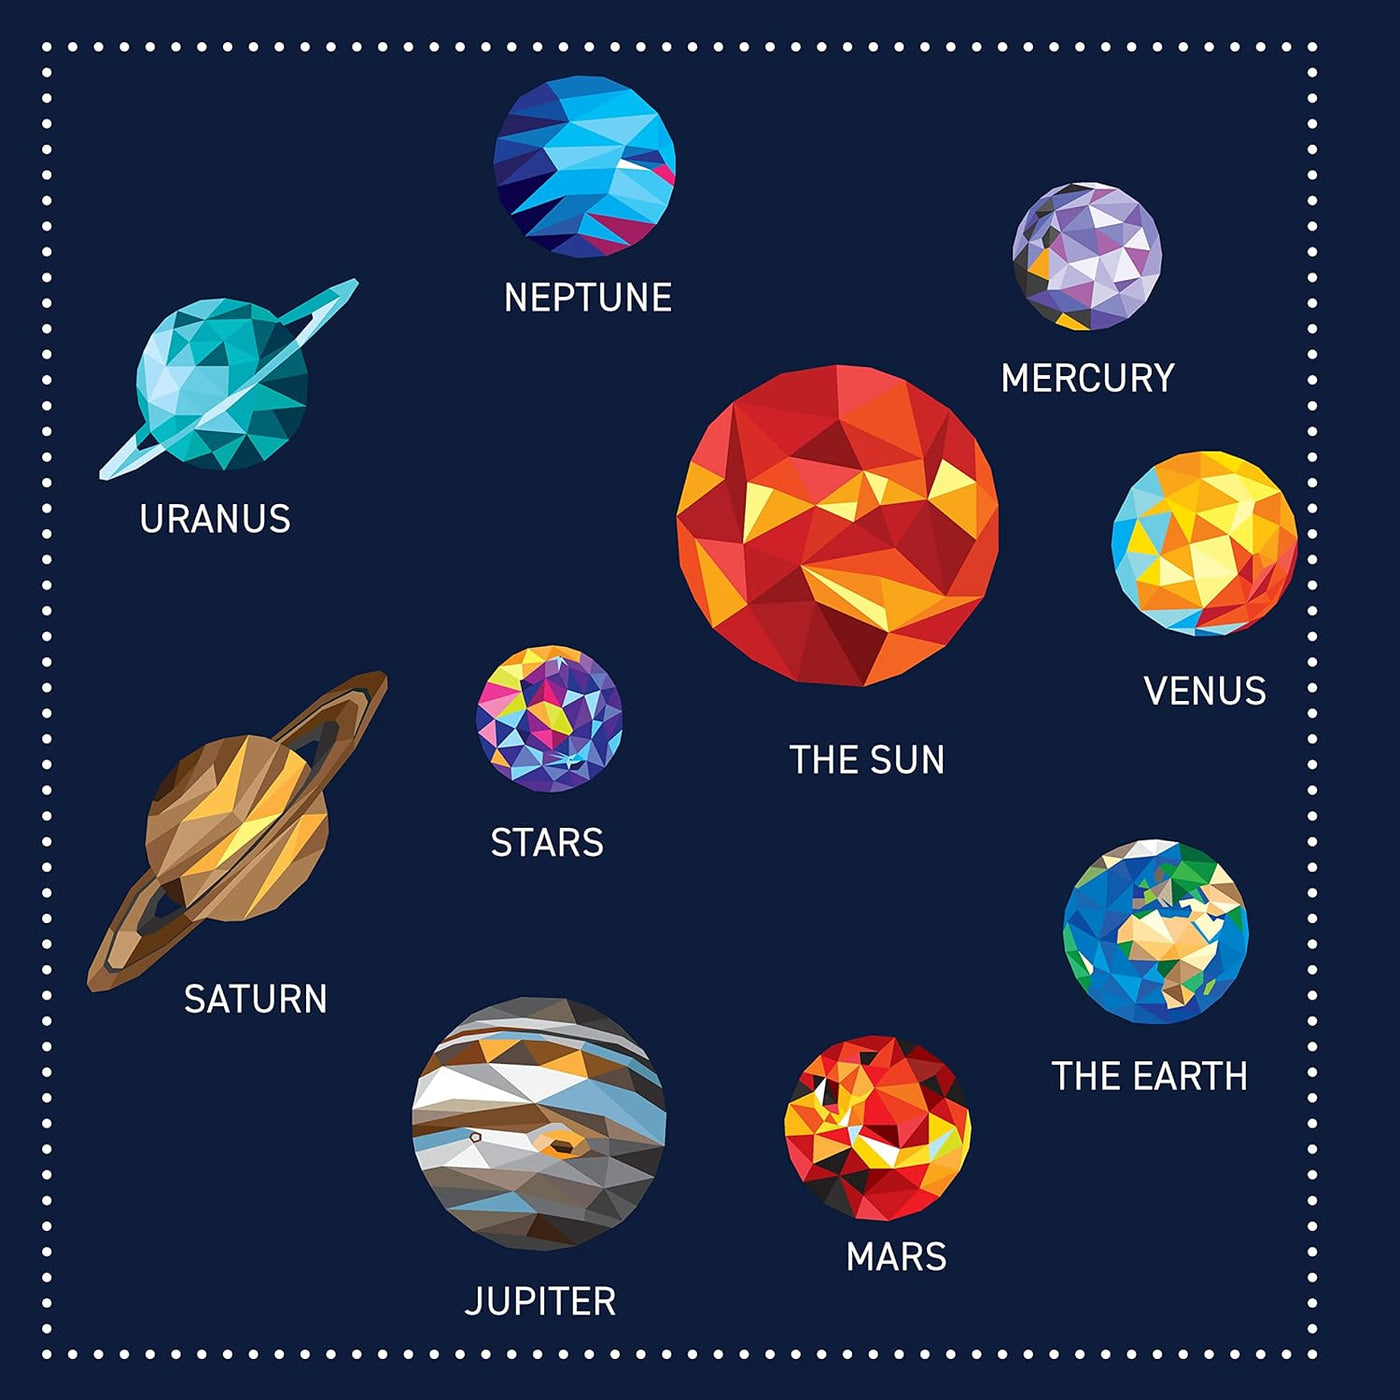 My Sticker Paintings Planets Book